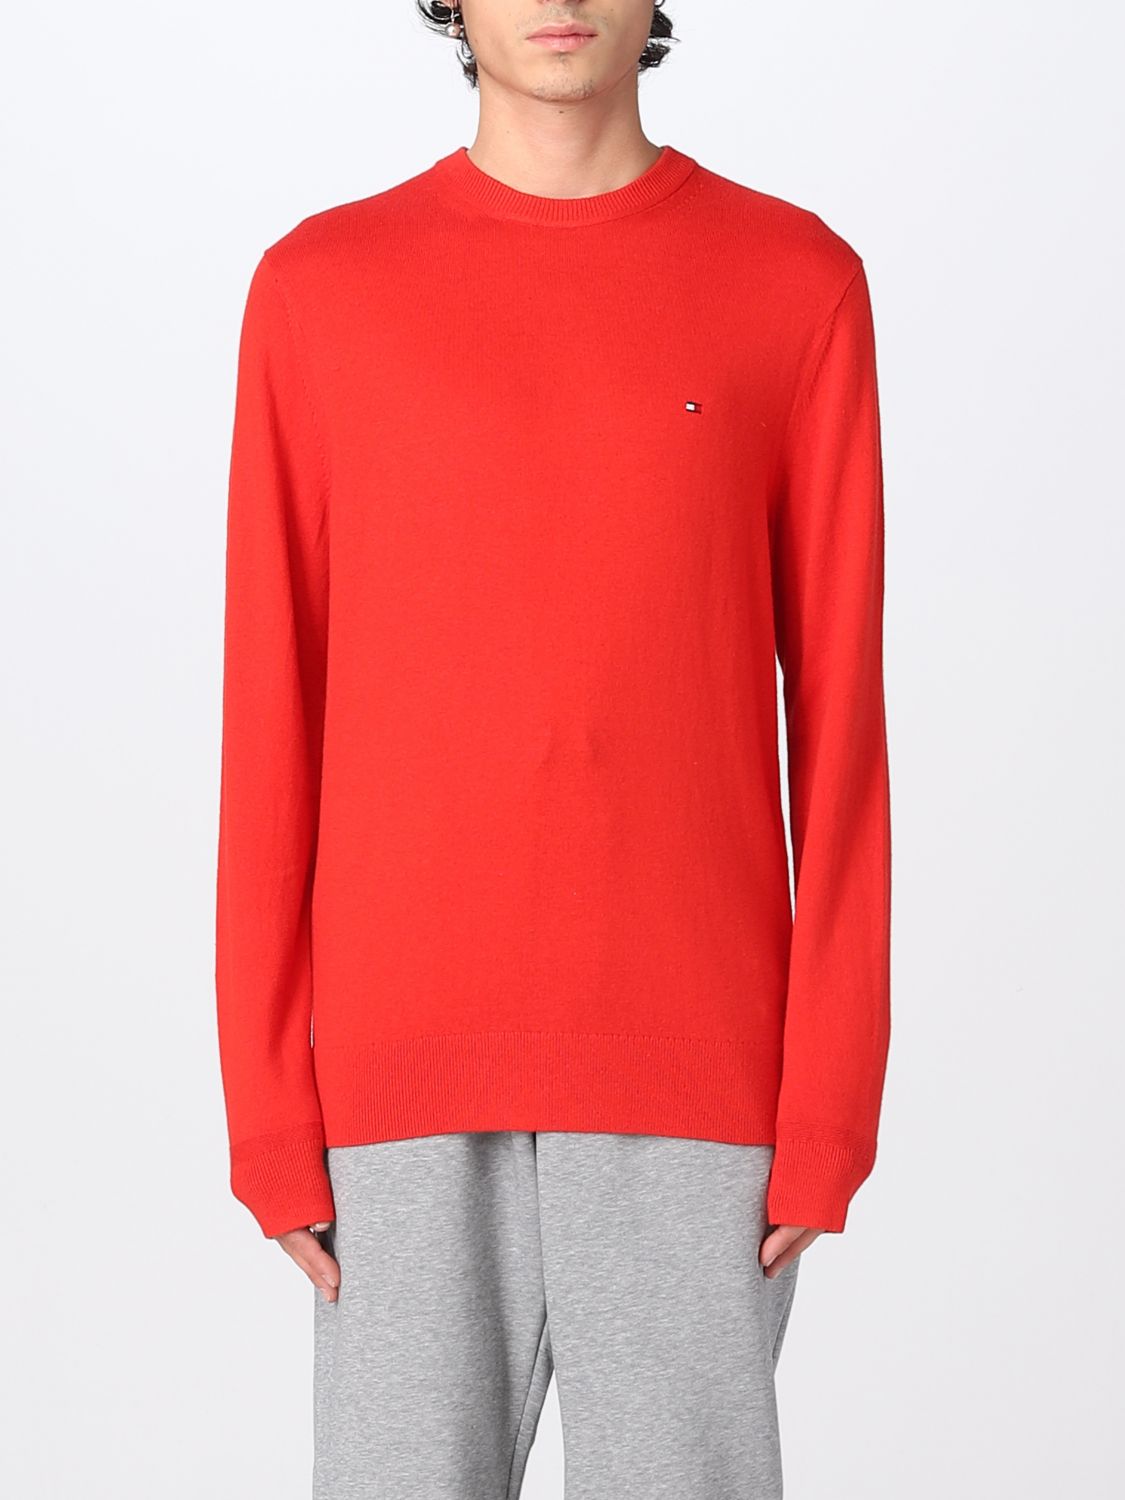 Tommy Hilfiger Pima Cotton And Cashmere Blend Sweater In Cherry